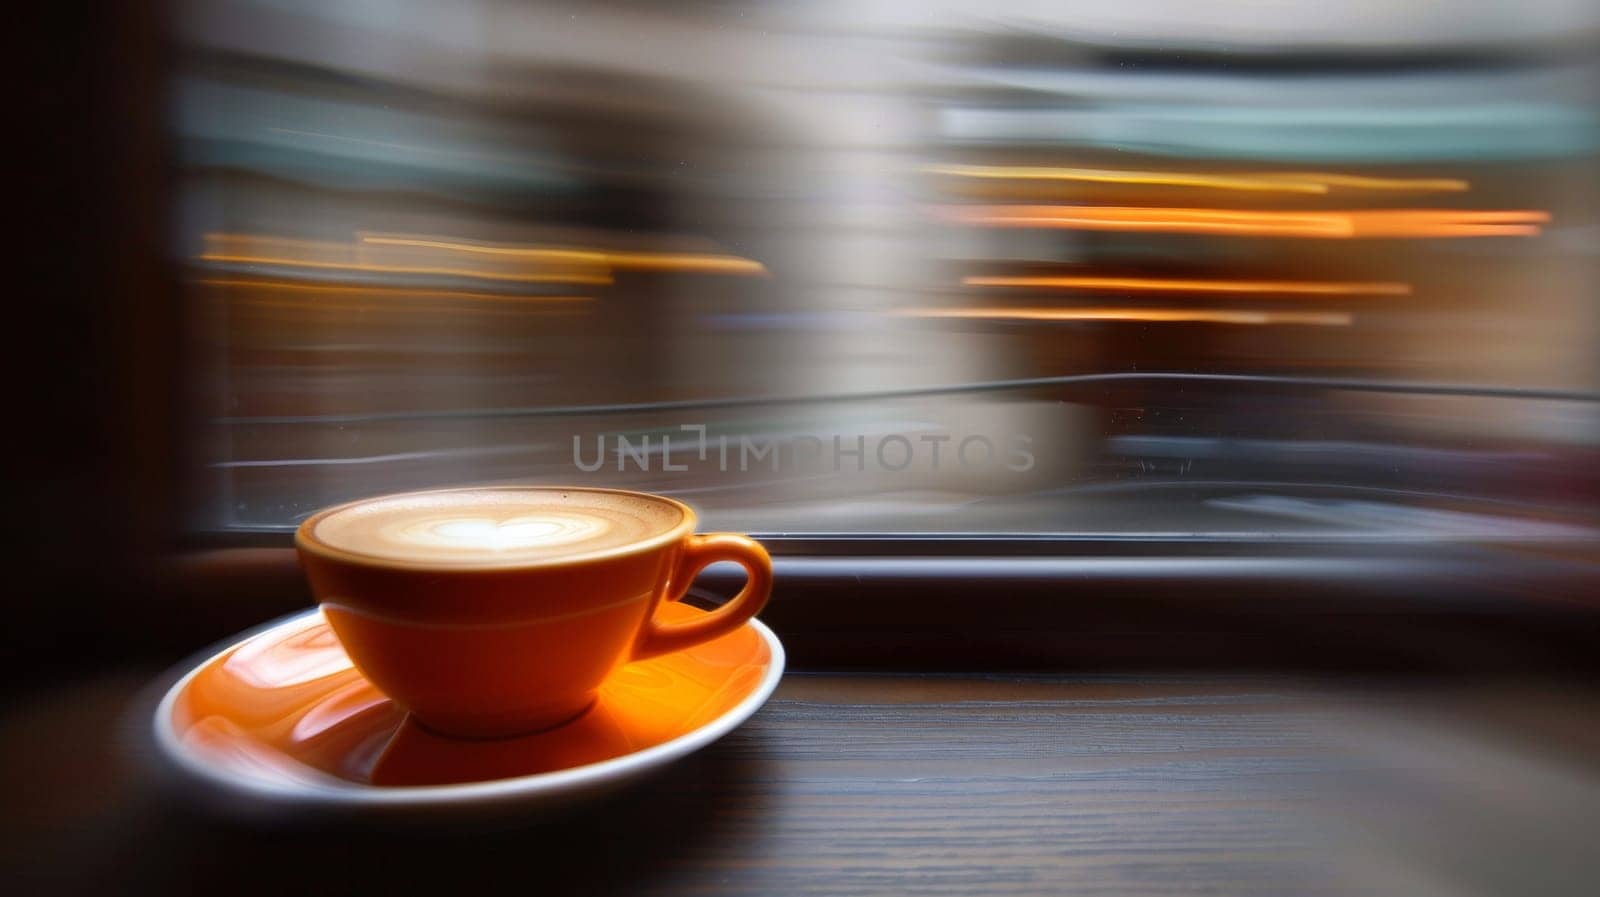 A cup of coffee on saucer sitting in front window